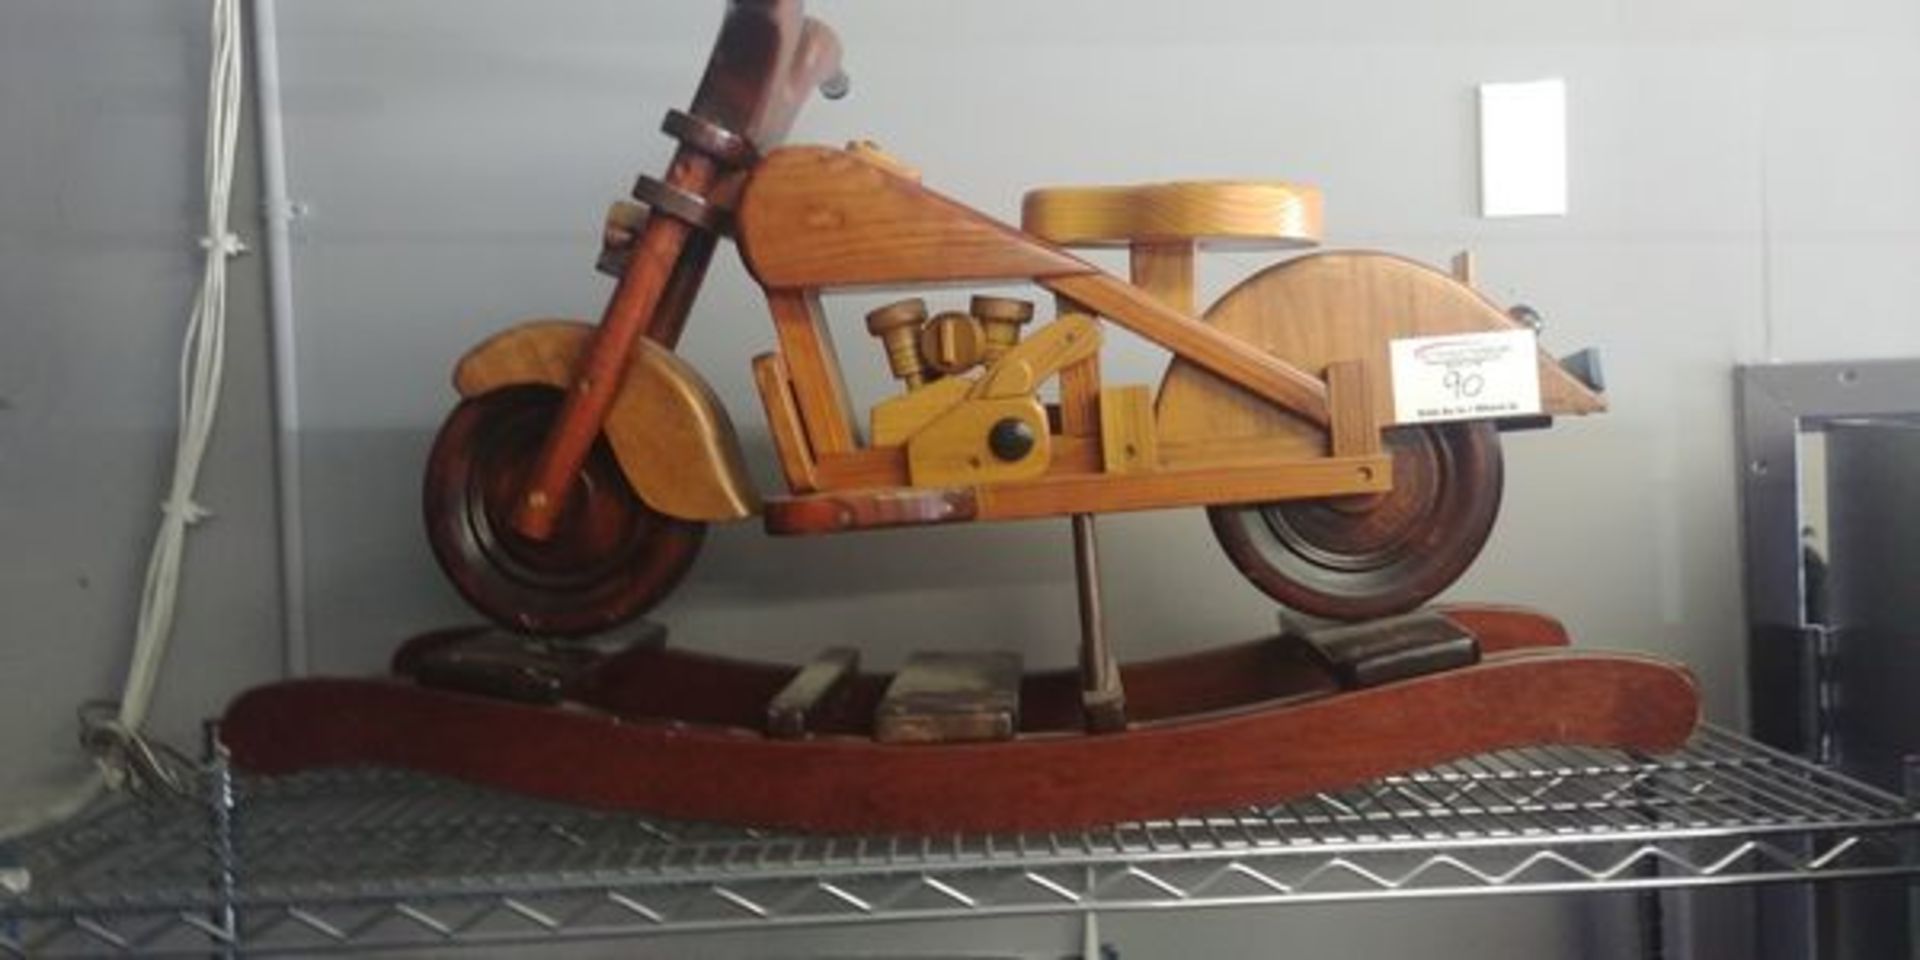 Motorcycle Rocking Horse - Note chip on front end